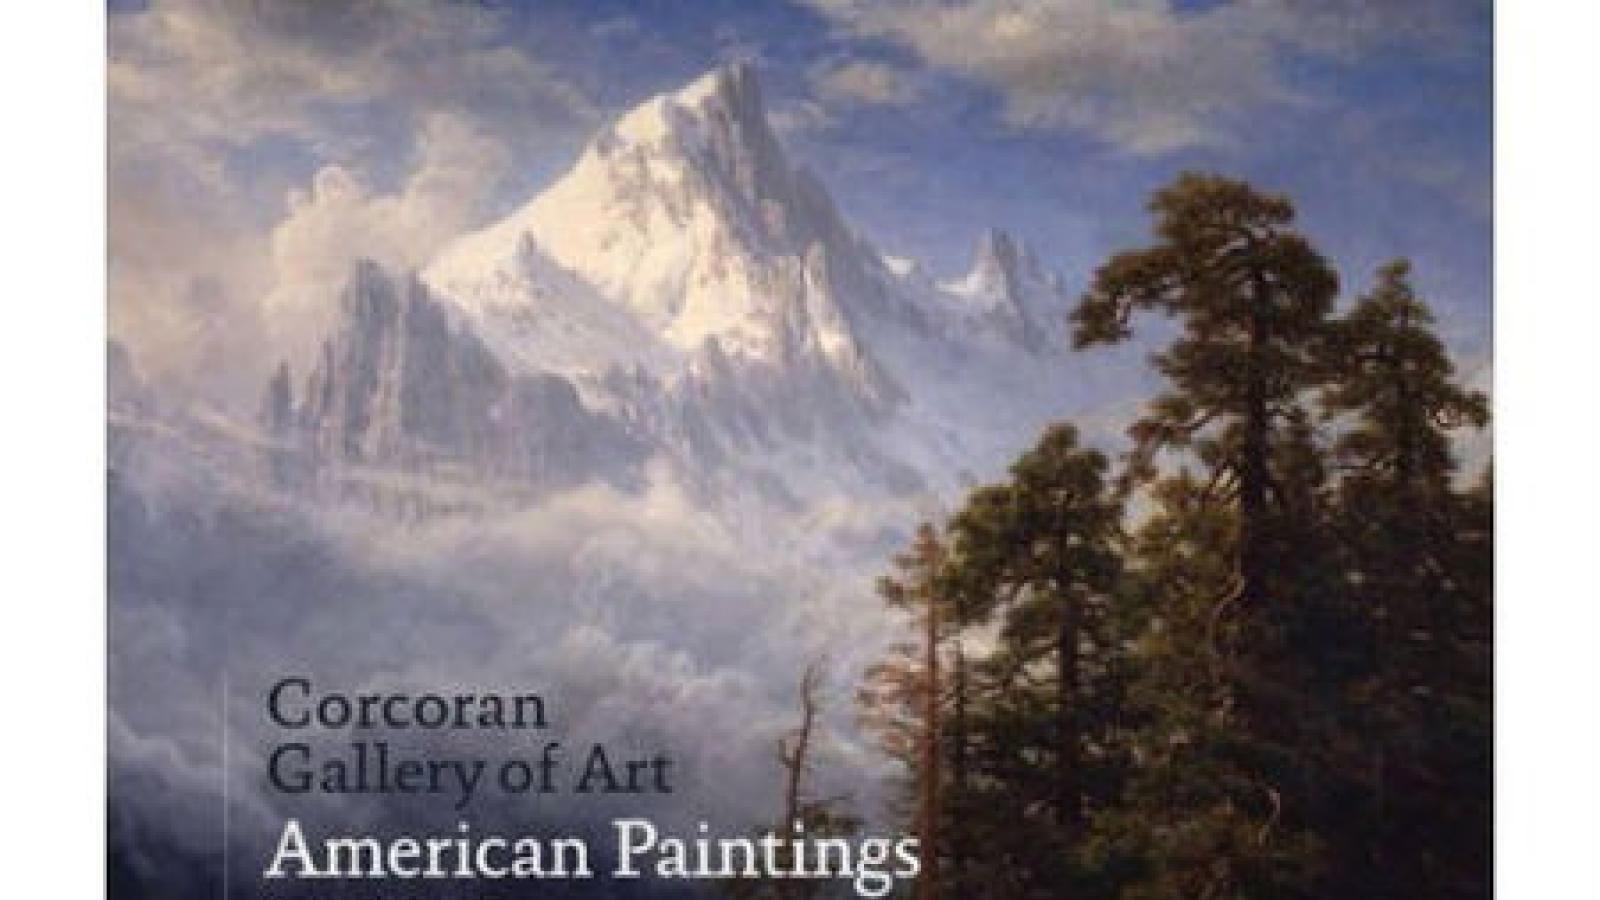 Mount Corcoran by Albert Bierstadt, used courtesy of the Corcoran Gallery of Art